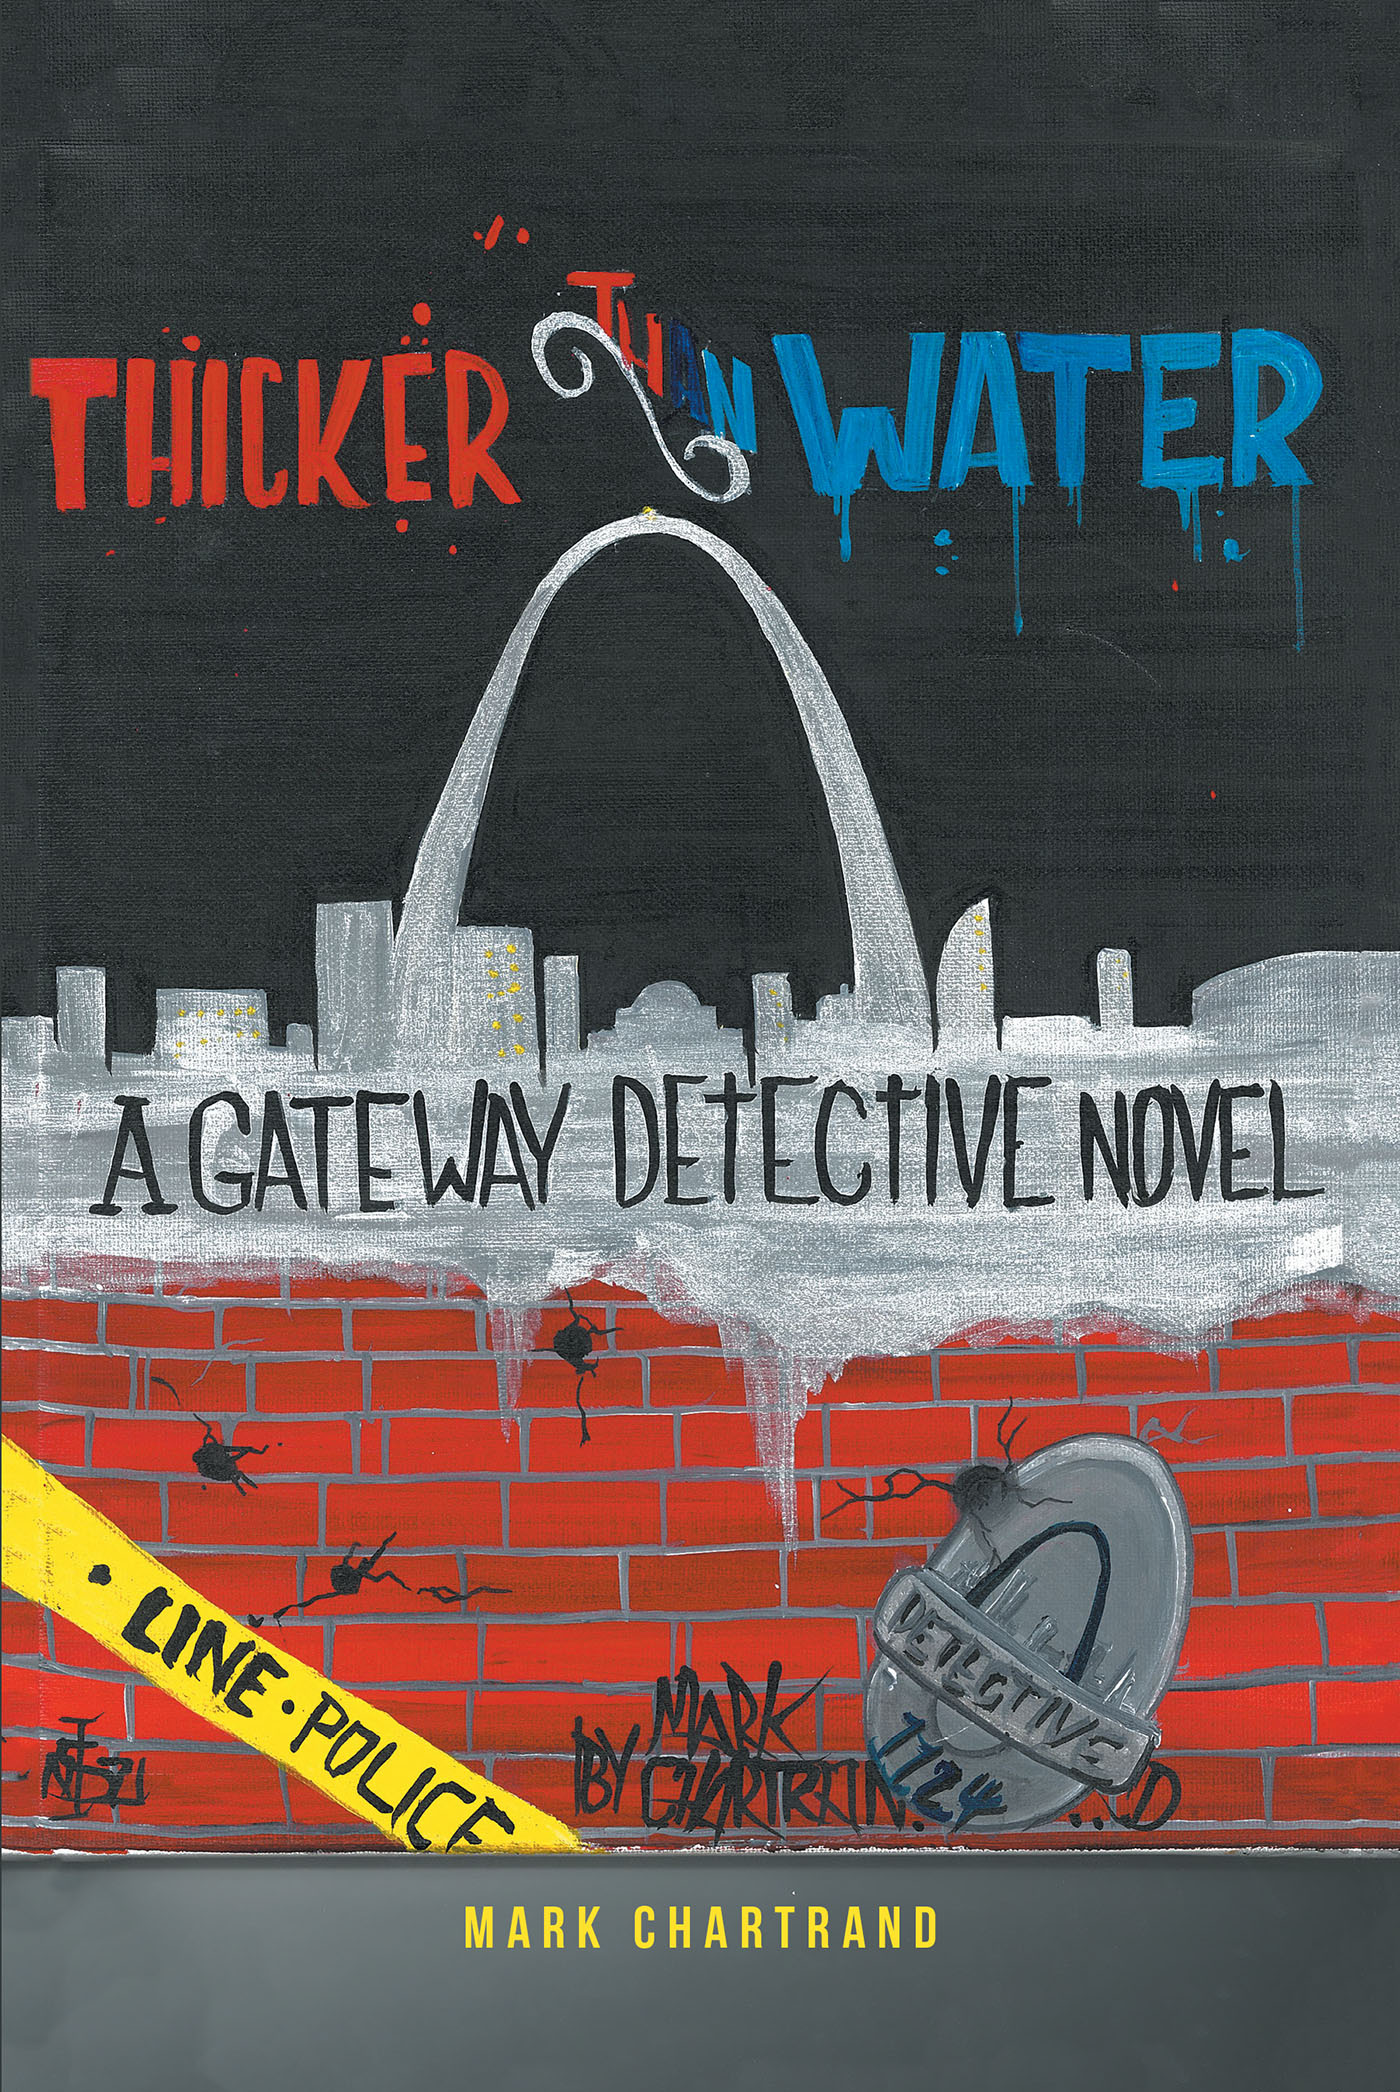 Thicker Than Water Cover Image